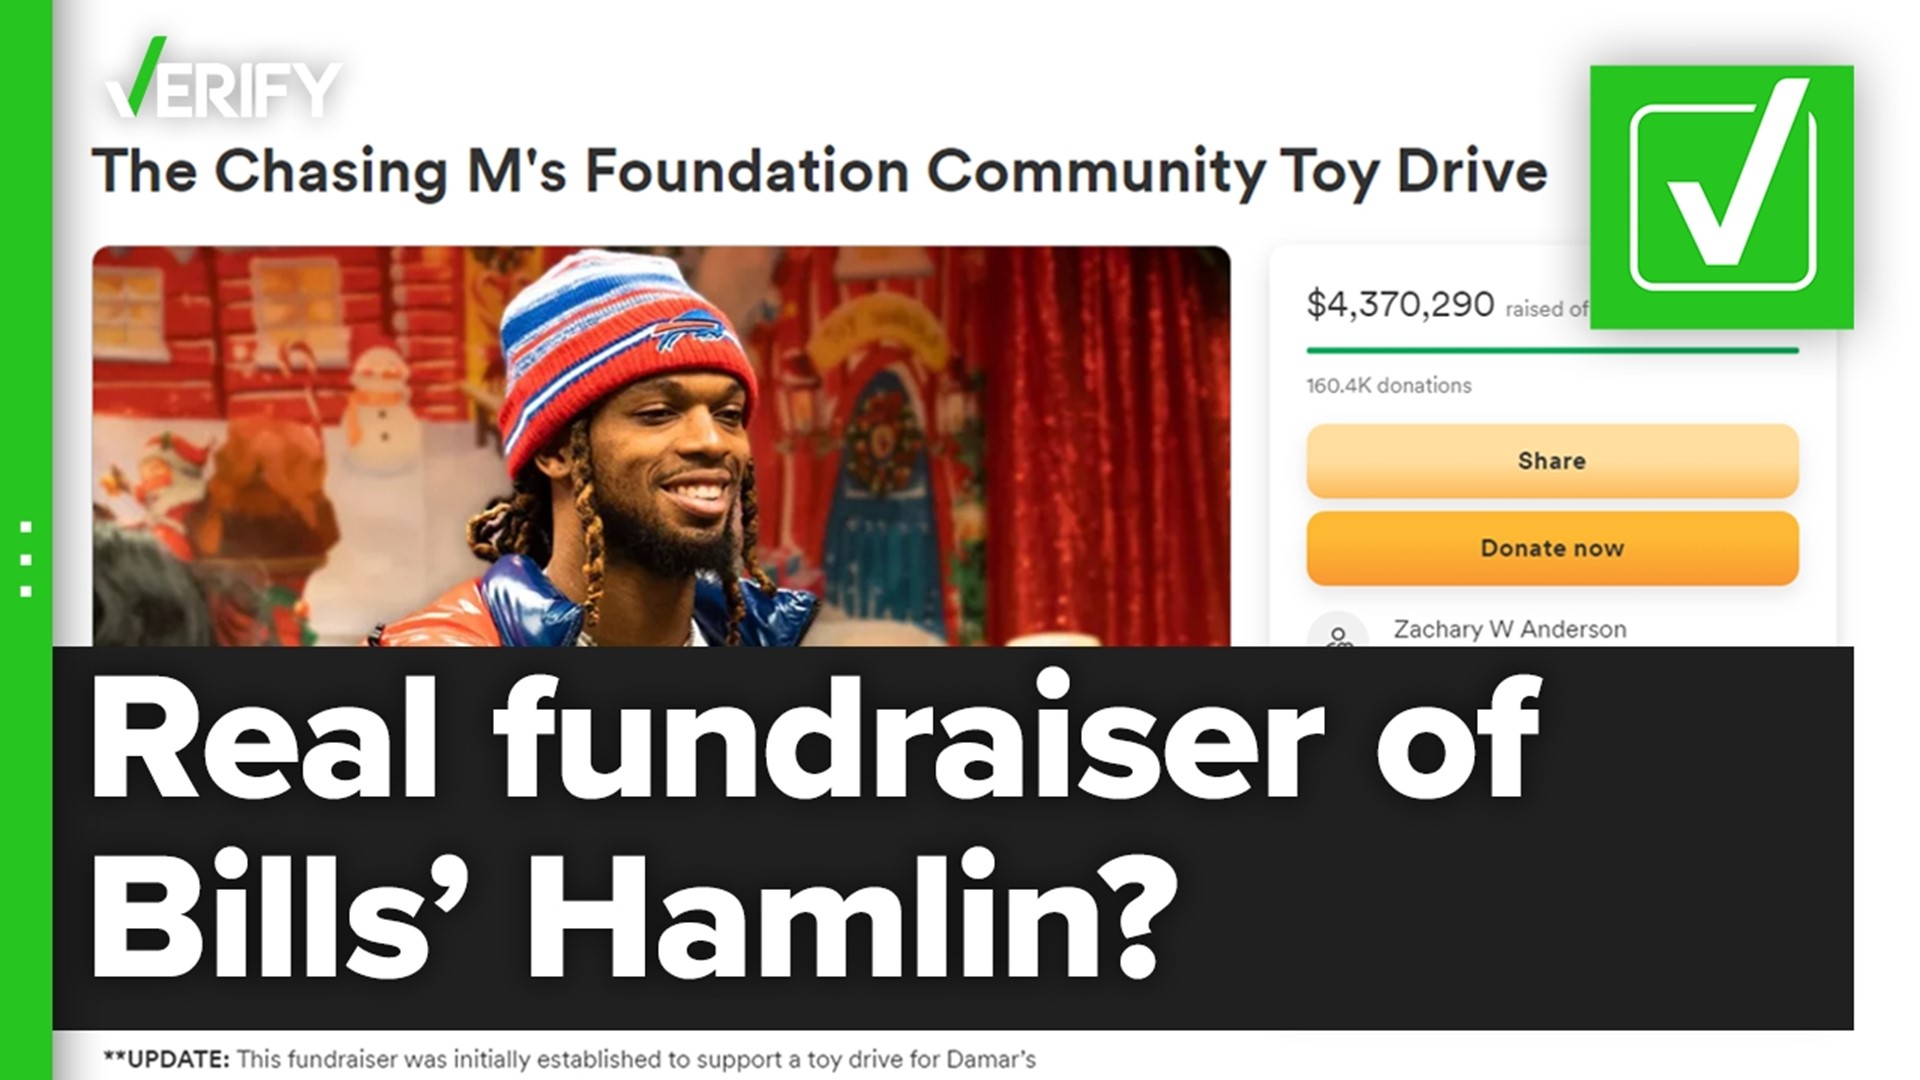 Fans have raised millions in support of Buffalo Bills safety Damar Hamlin's toy drive after he suffered a cardiac arrest during a football game against the Bengals.